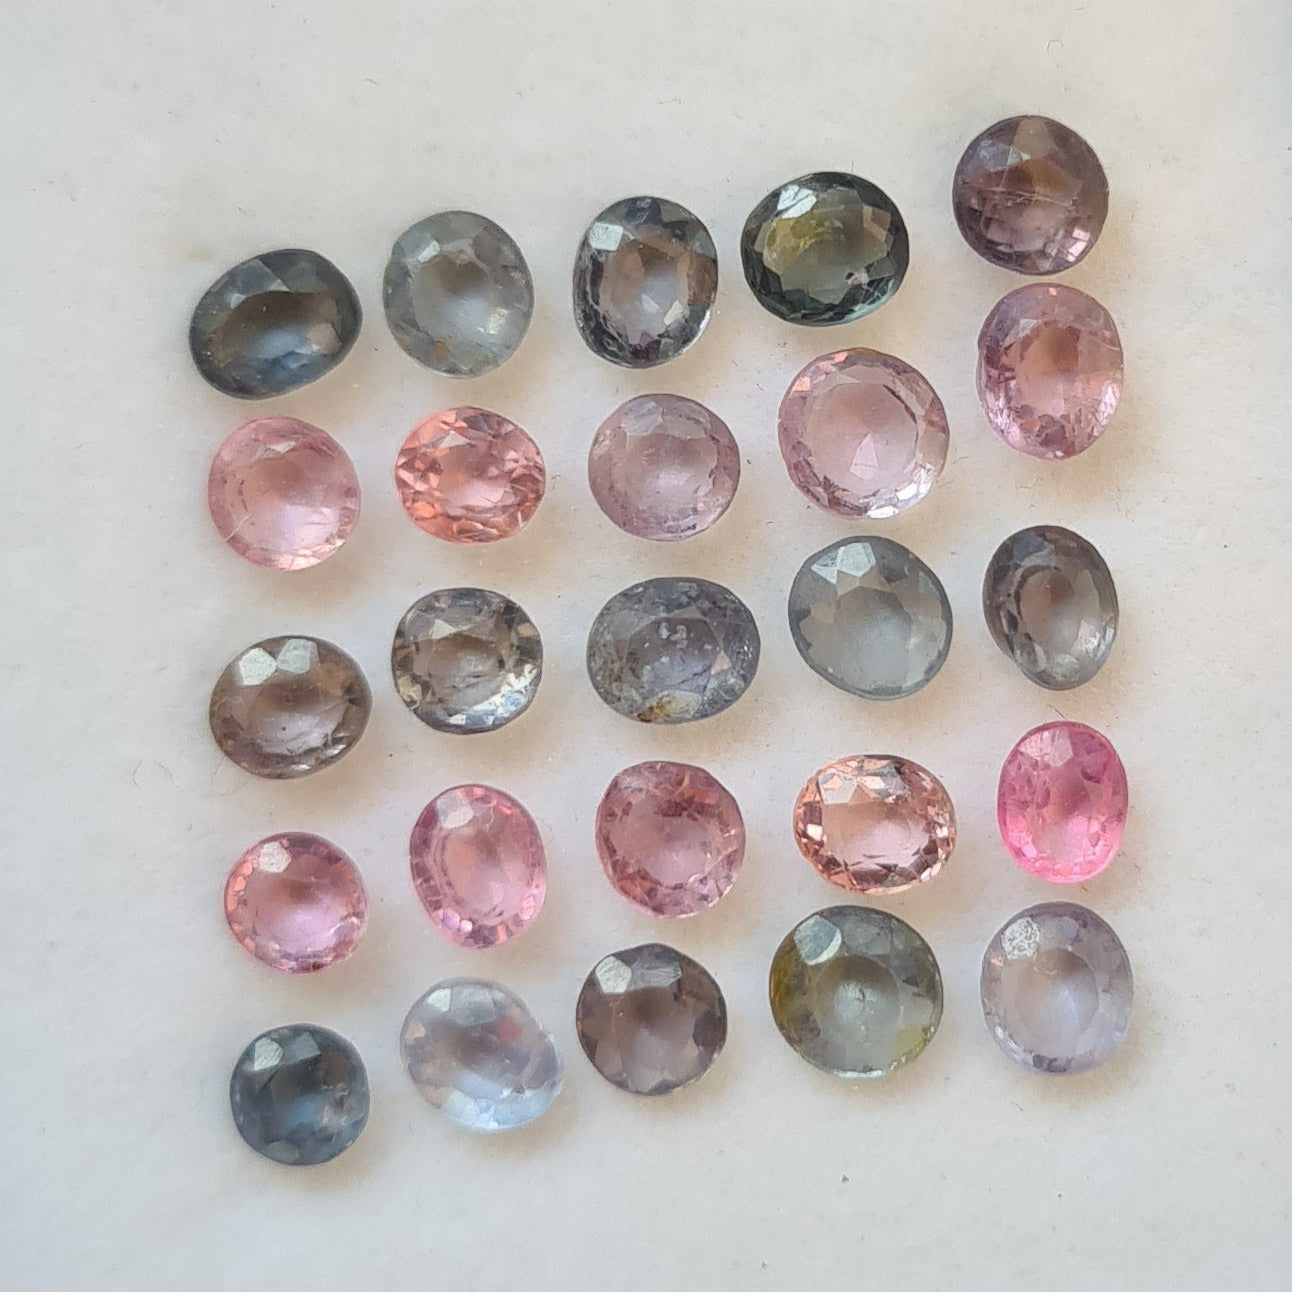 25 Pieces Natural Multi Spinel Faceted Gemstone Mix Shape Size: 4-5mm - The LabradoriteKing